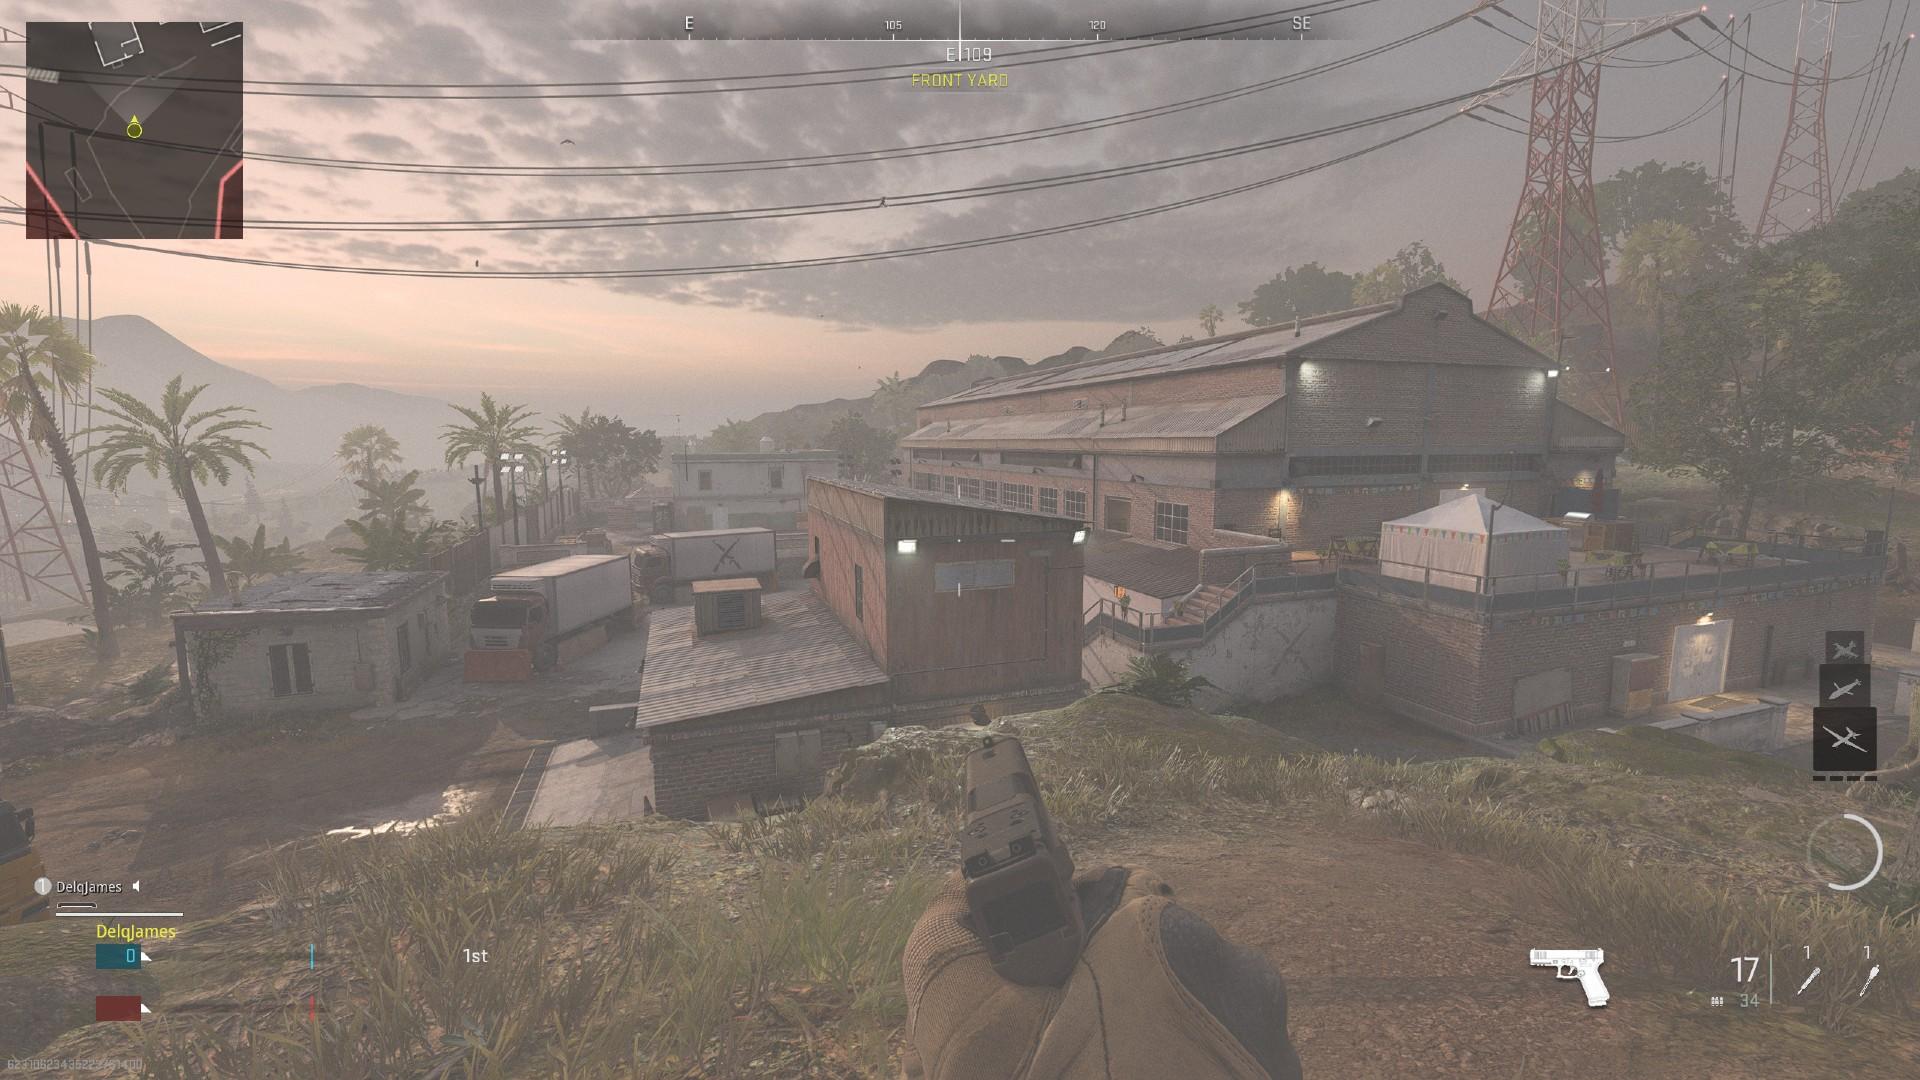 Modern Warfare 2 Maps, Guide and Features